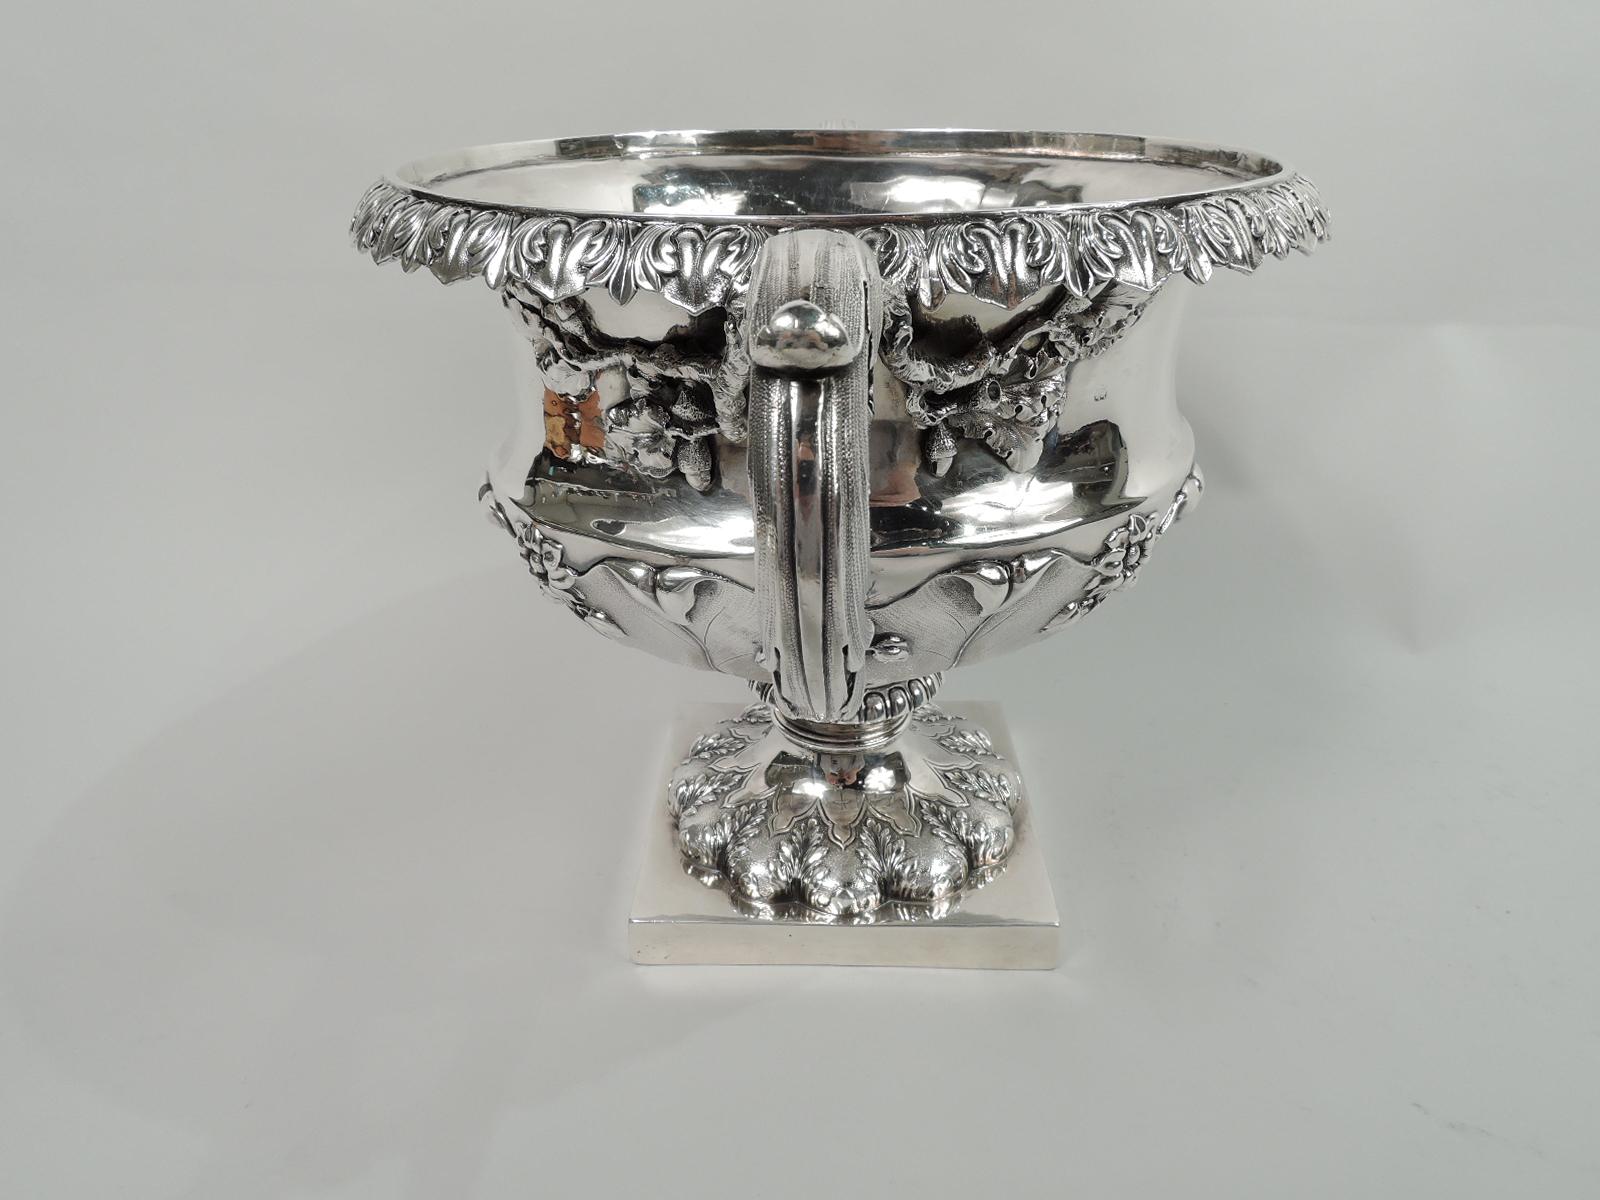 English Georgian Regency sterling silver bowl. Made by Rebecca Emes and Edward Barnard in London, ca 1830. Bellied bowl with chased and stippled leaf and flower bowl. Concave neck and turned-down leaf-and-dart rim. Leaf-capped and -wrapped side